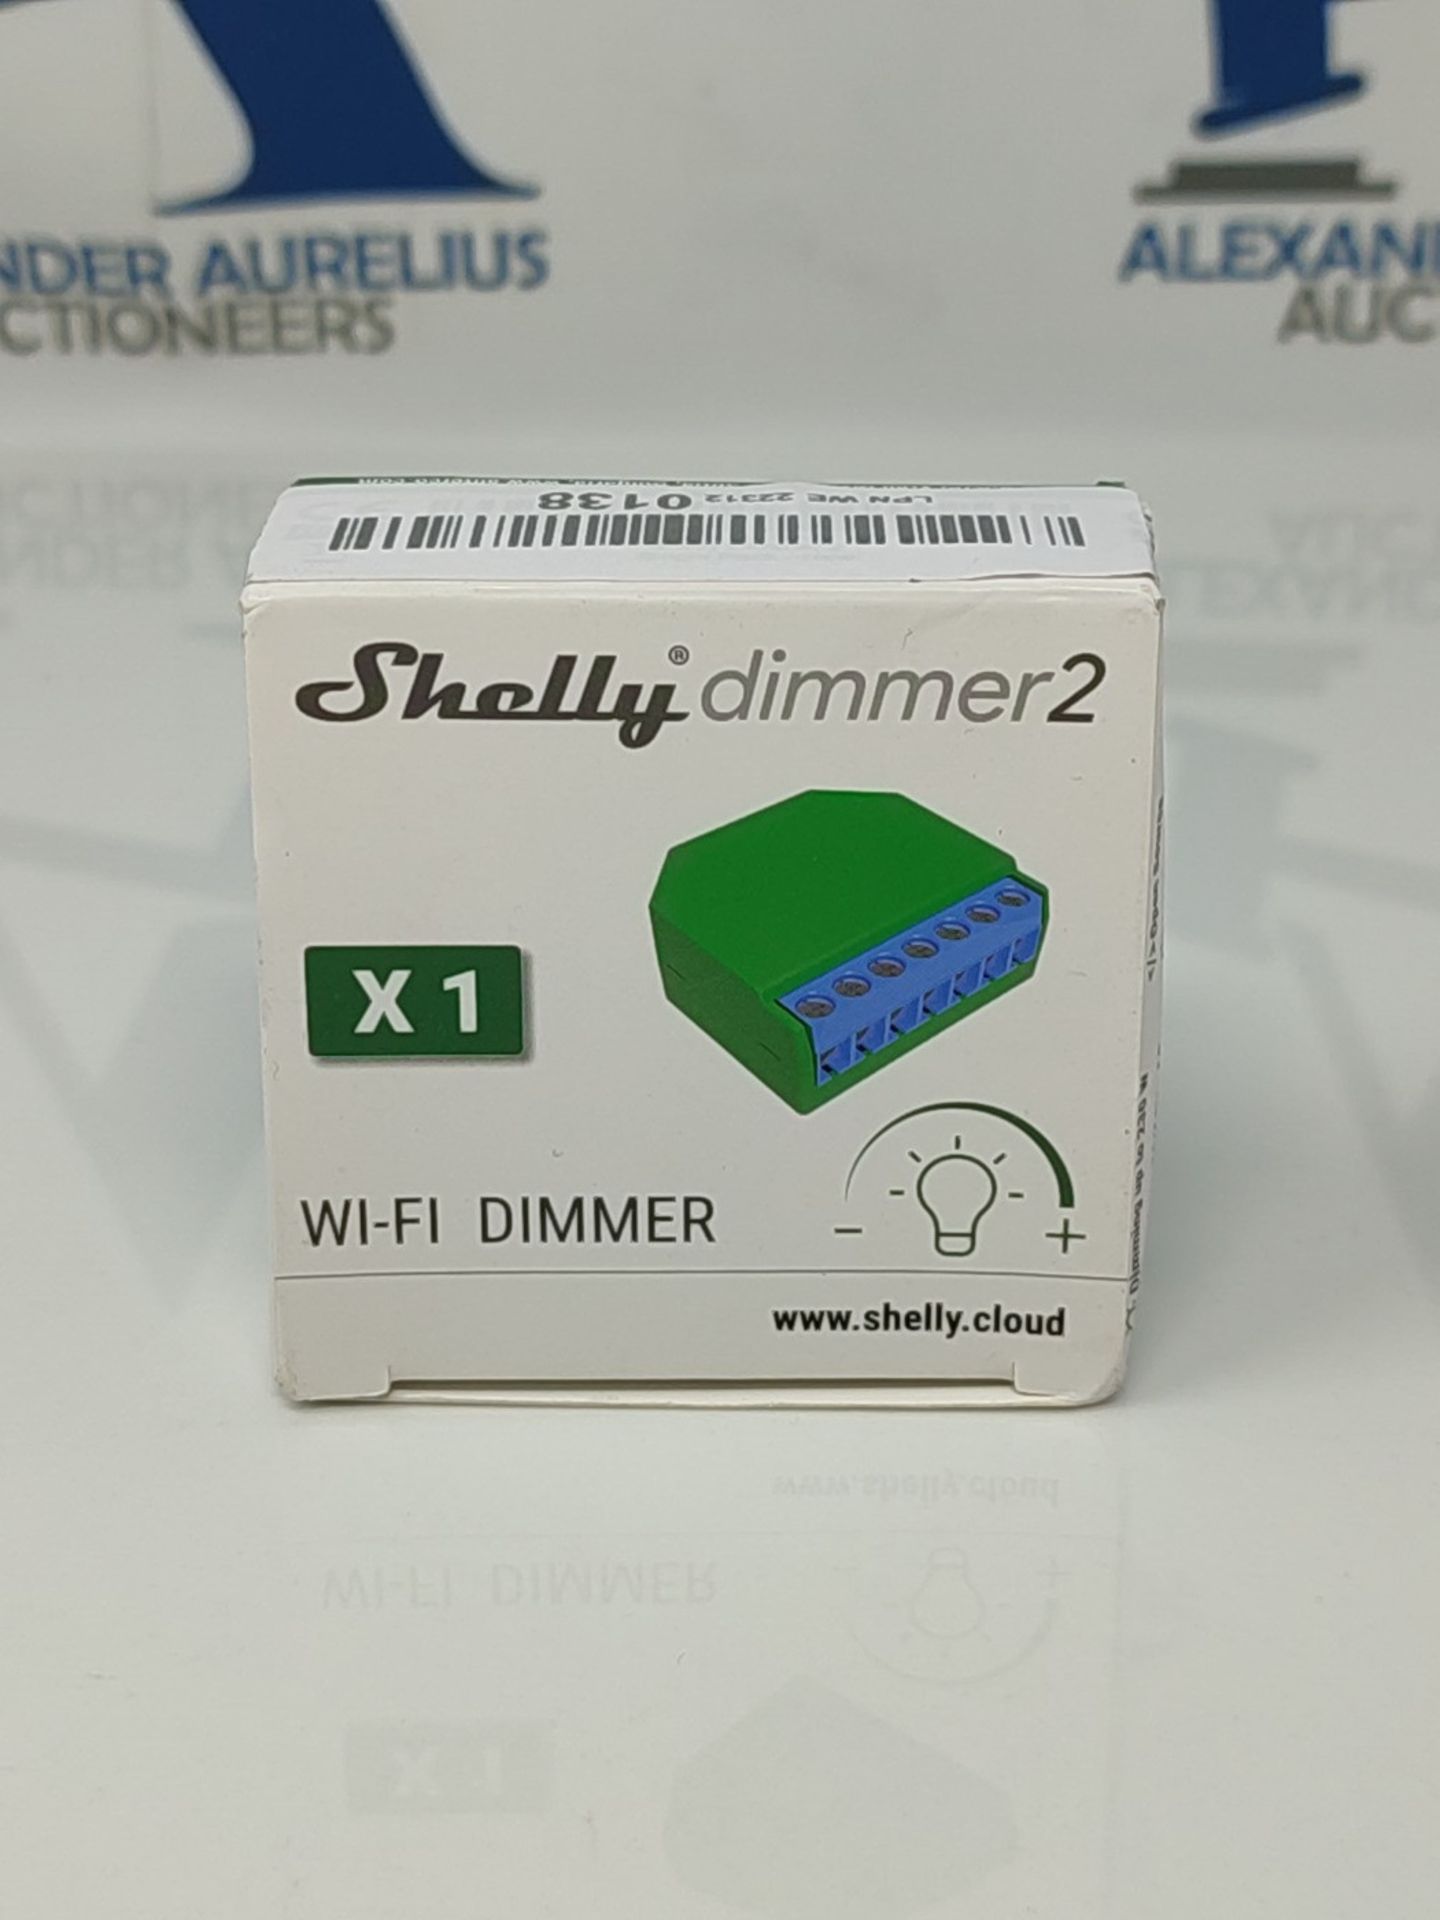 Shelly - Dimmer 2  Version 2021  WiFi dimmer suitable for Smart Home, Alexa & Go - Image 2 of 3